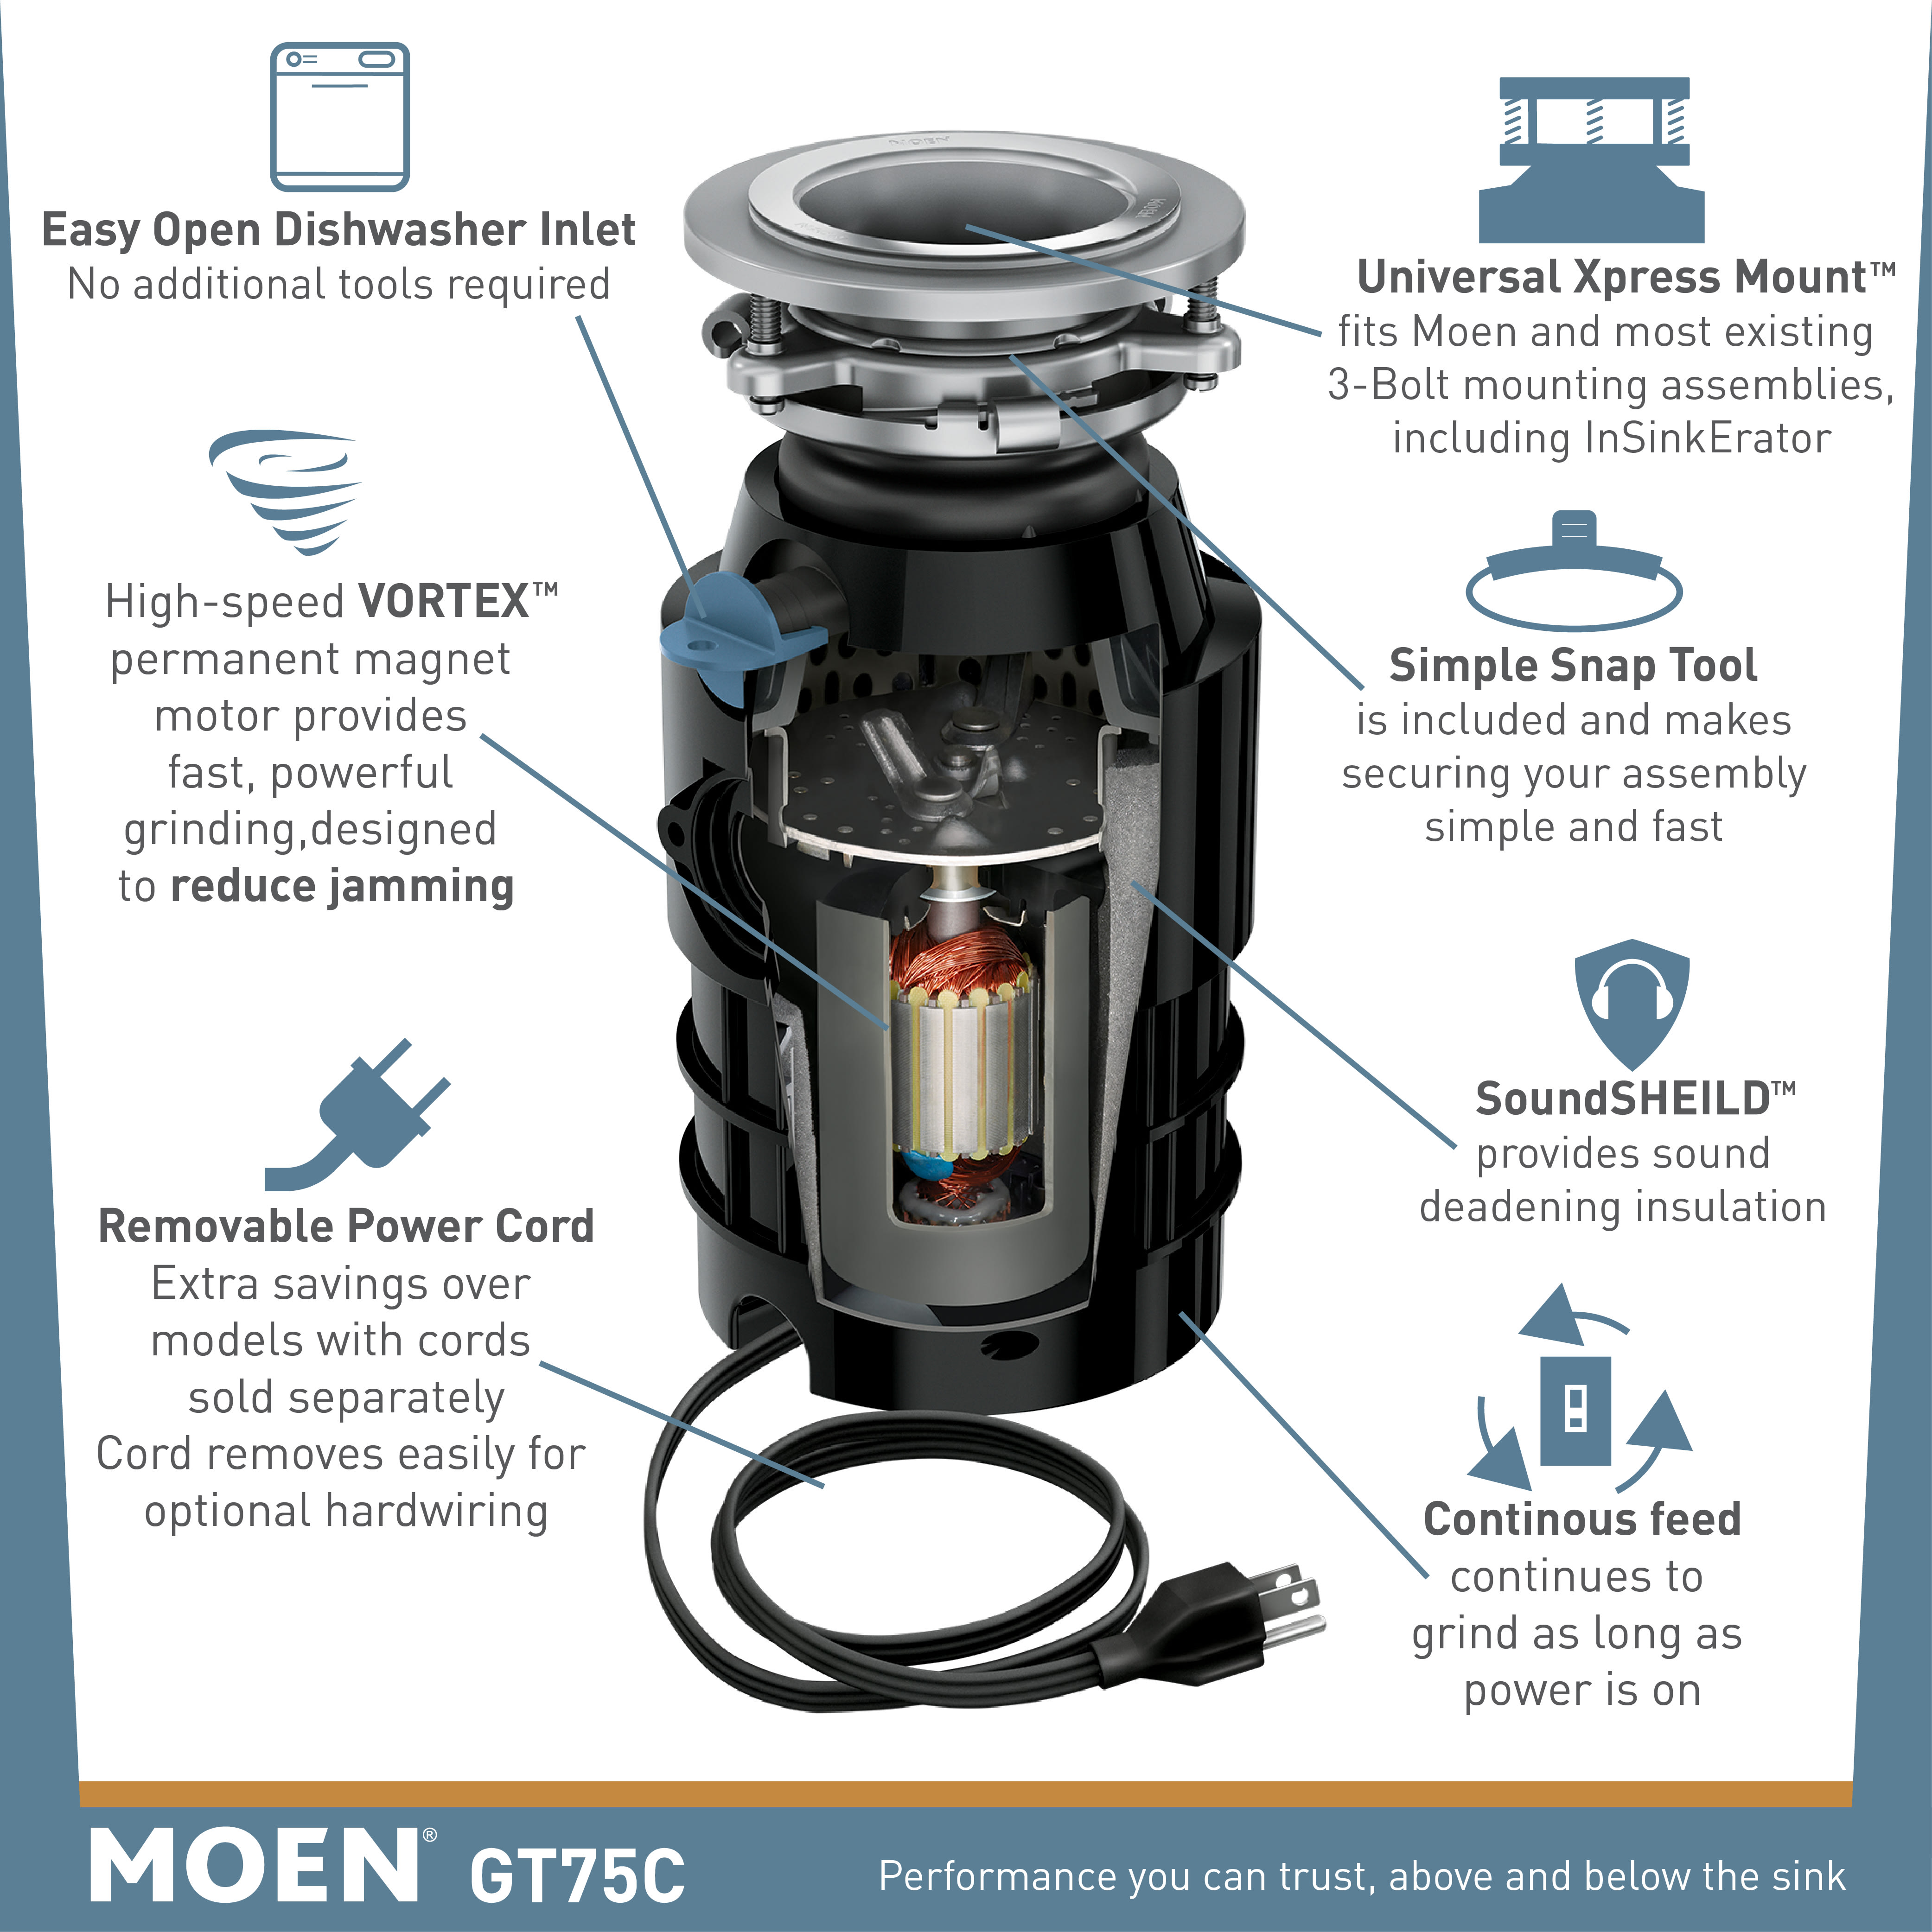 Moen GT75C GT Series 3/4 Horsepower Garbage Disposal with Fast Track Technology 